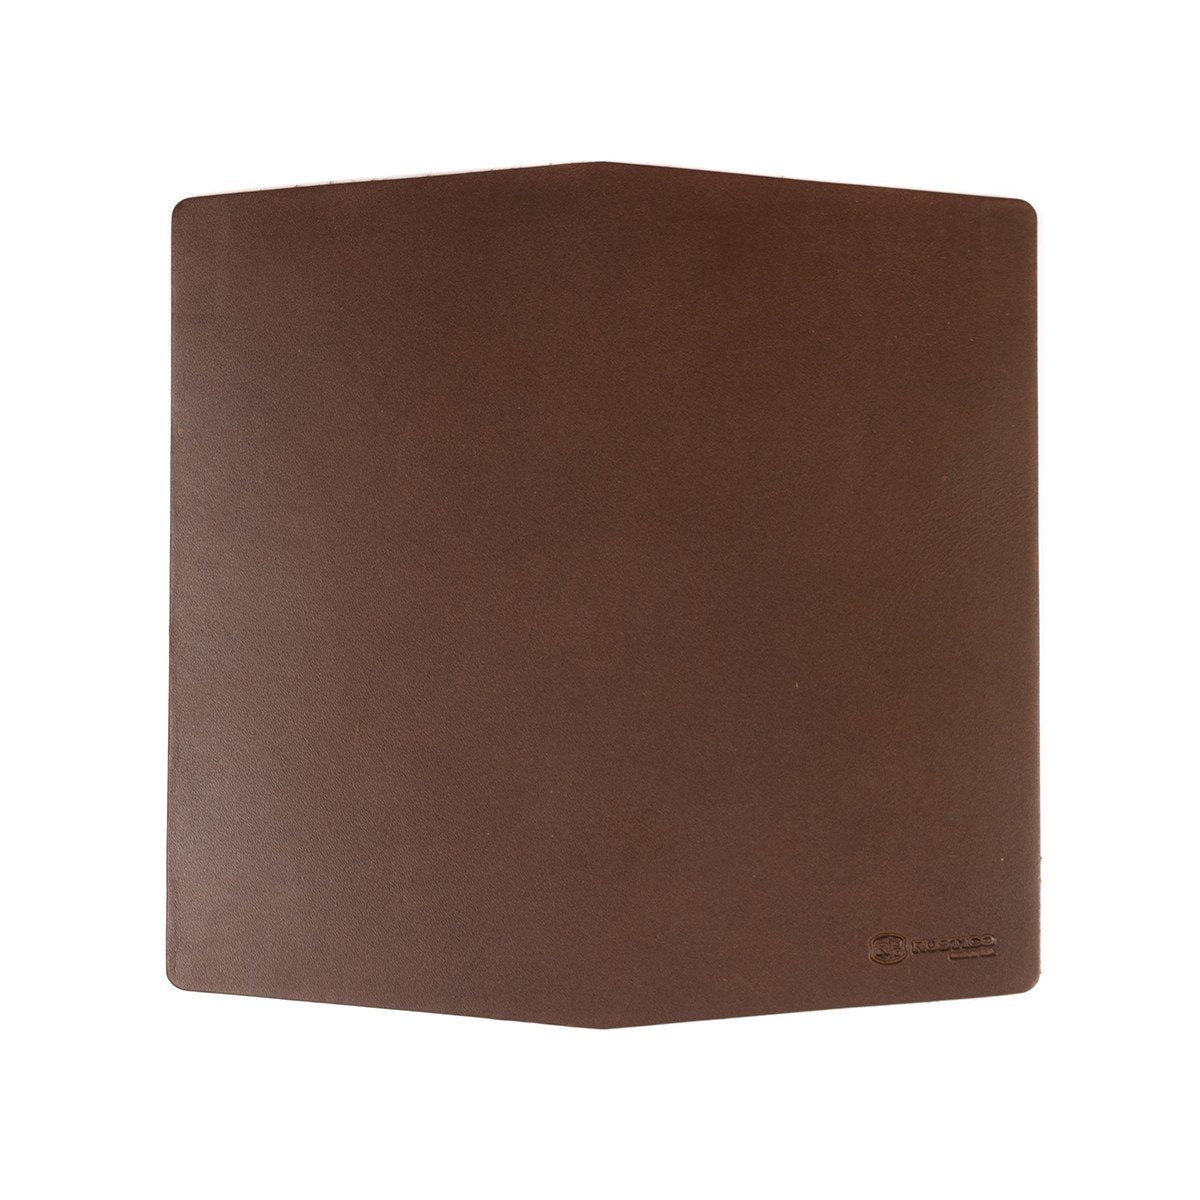 Basecamp Leather Mouse Pad